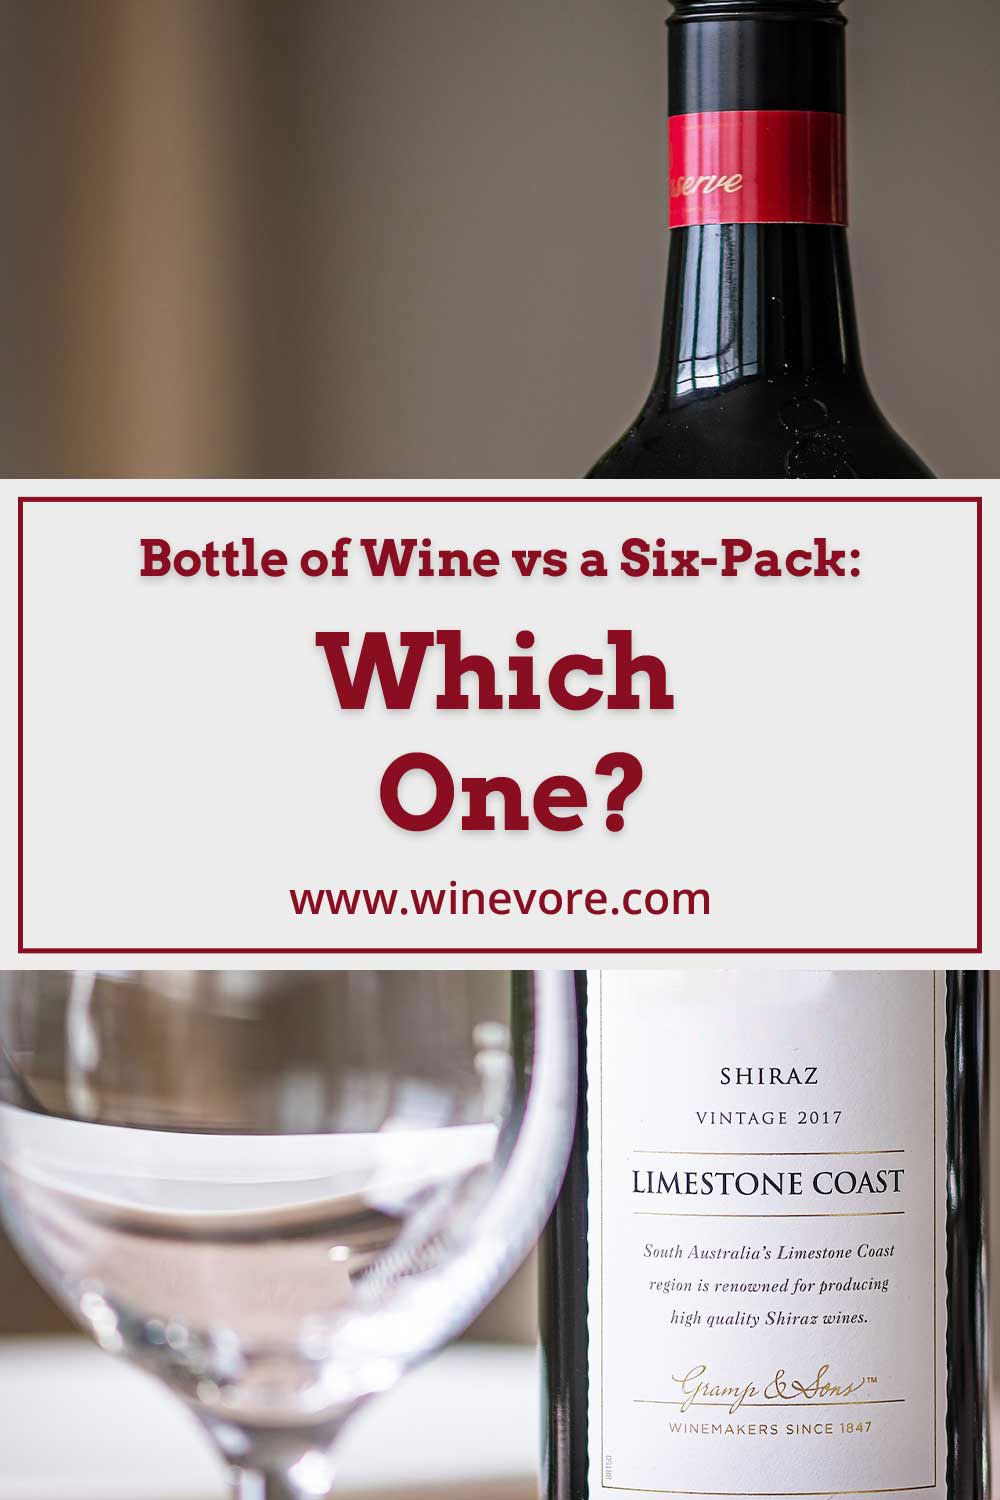 A bottle of Shiraz and a wine glass - Bottle of Wine vs a Six-Pack.